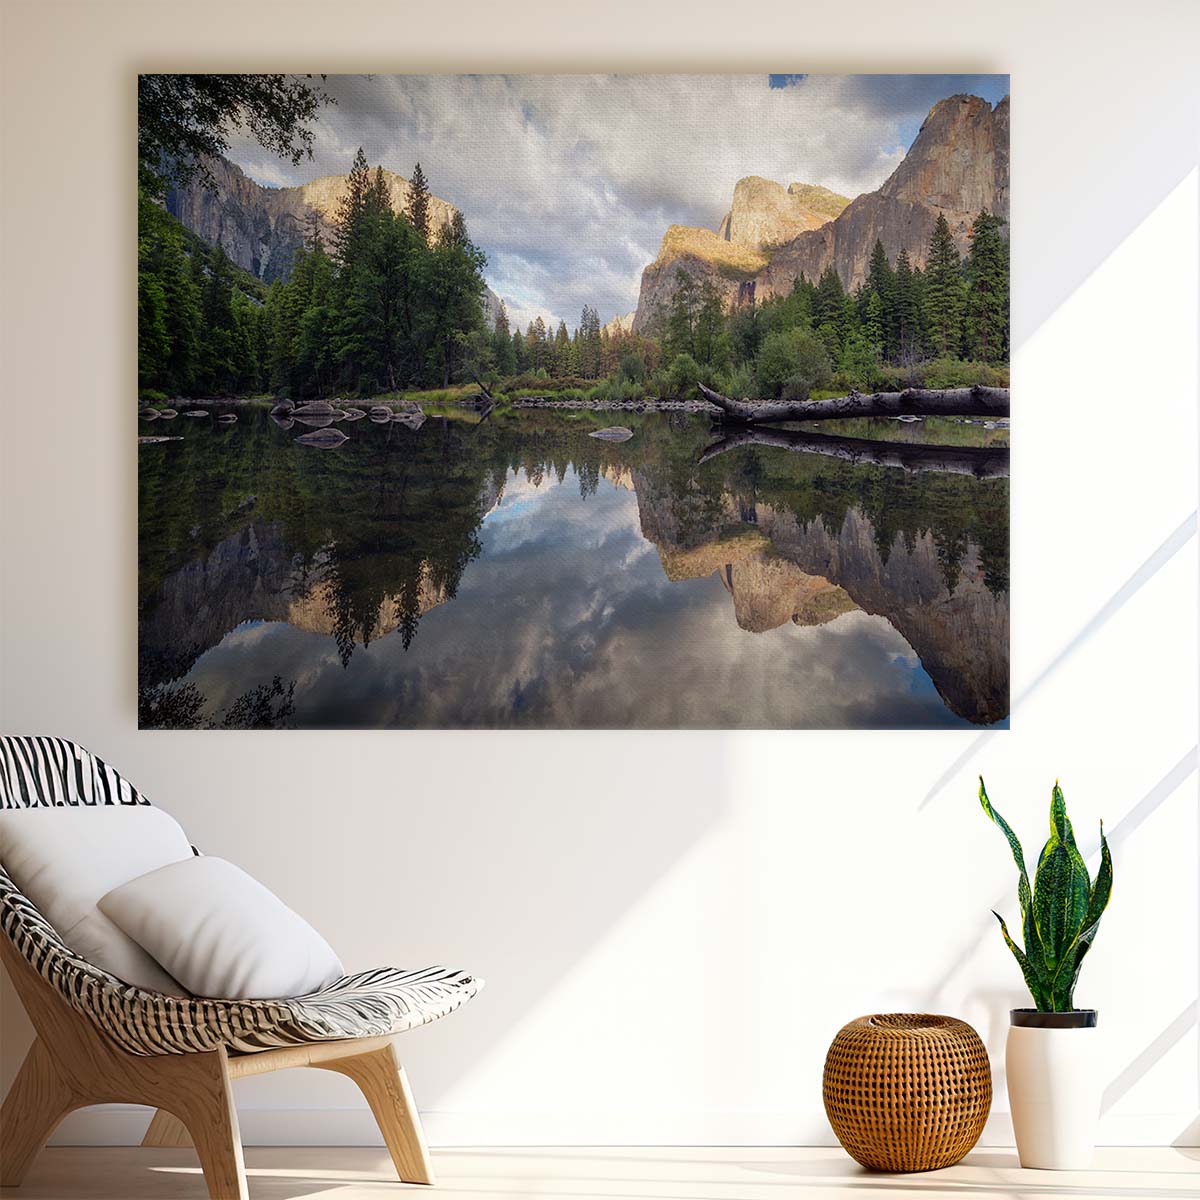 Yosemite Valley Sunrise Reflection Wall Art by Luxuriance Designs. Made in USA.